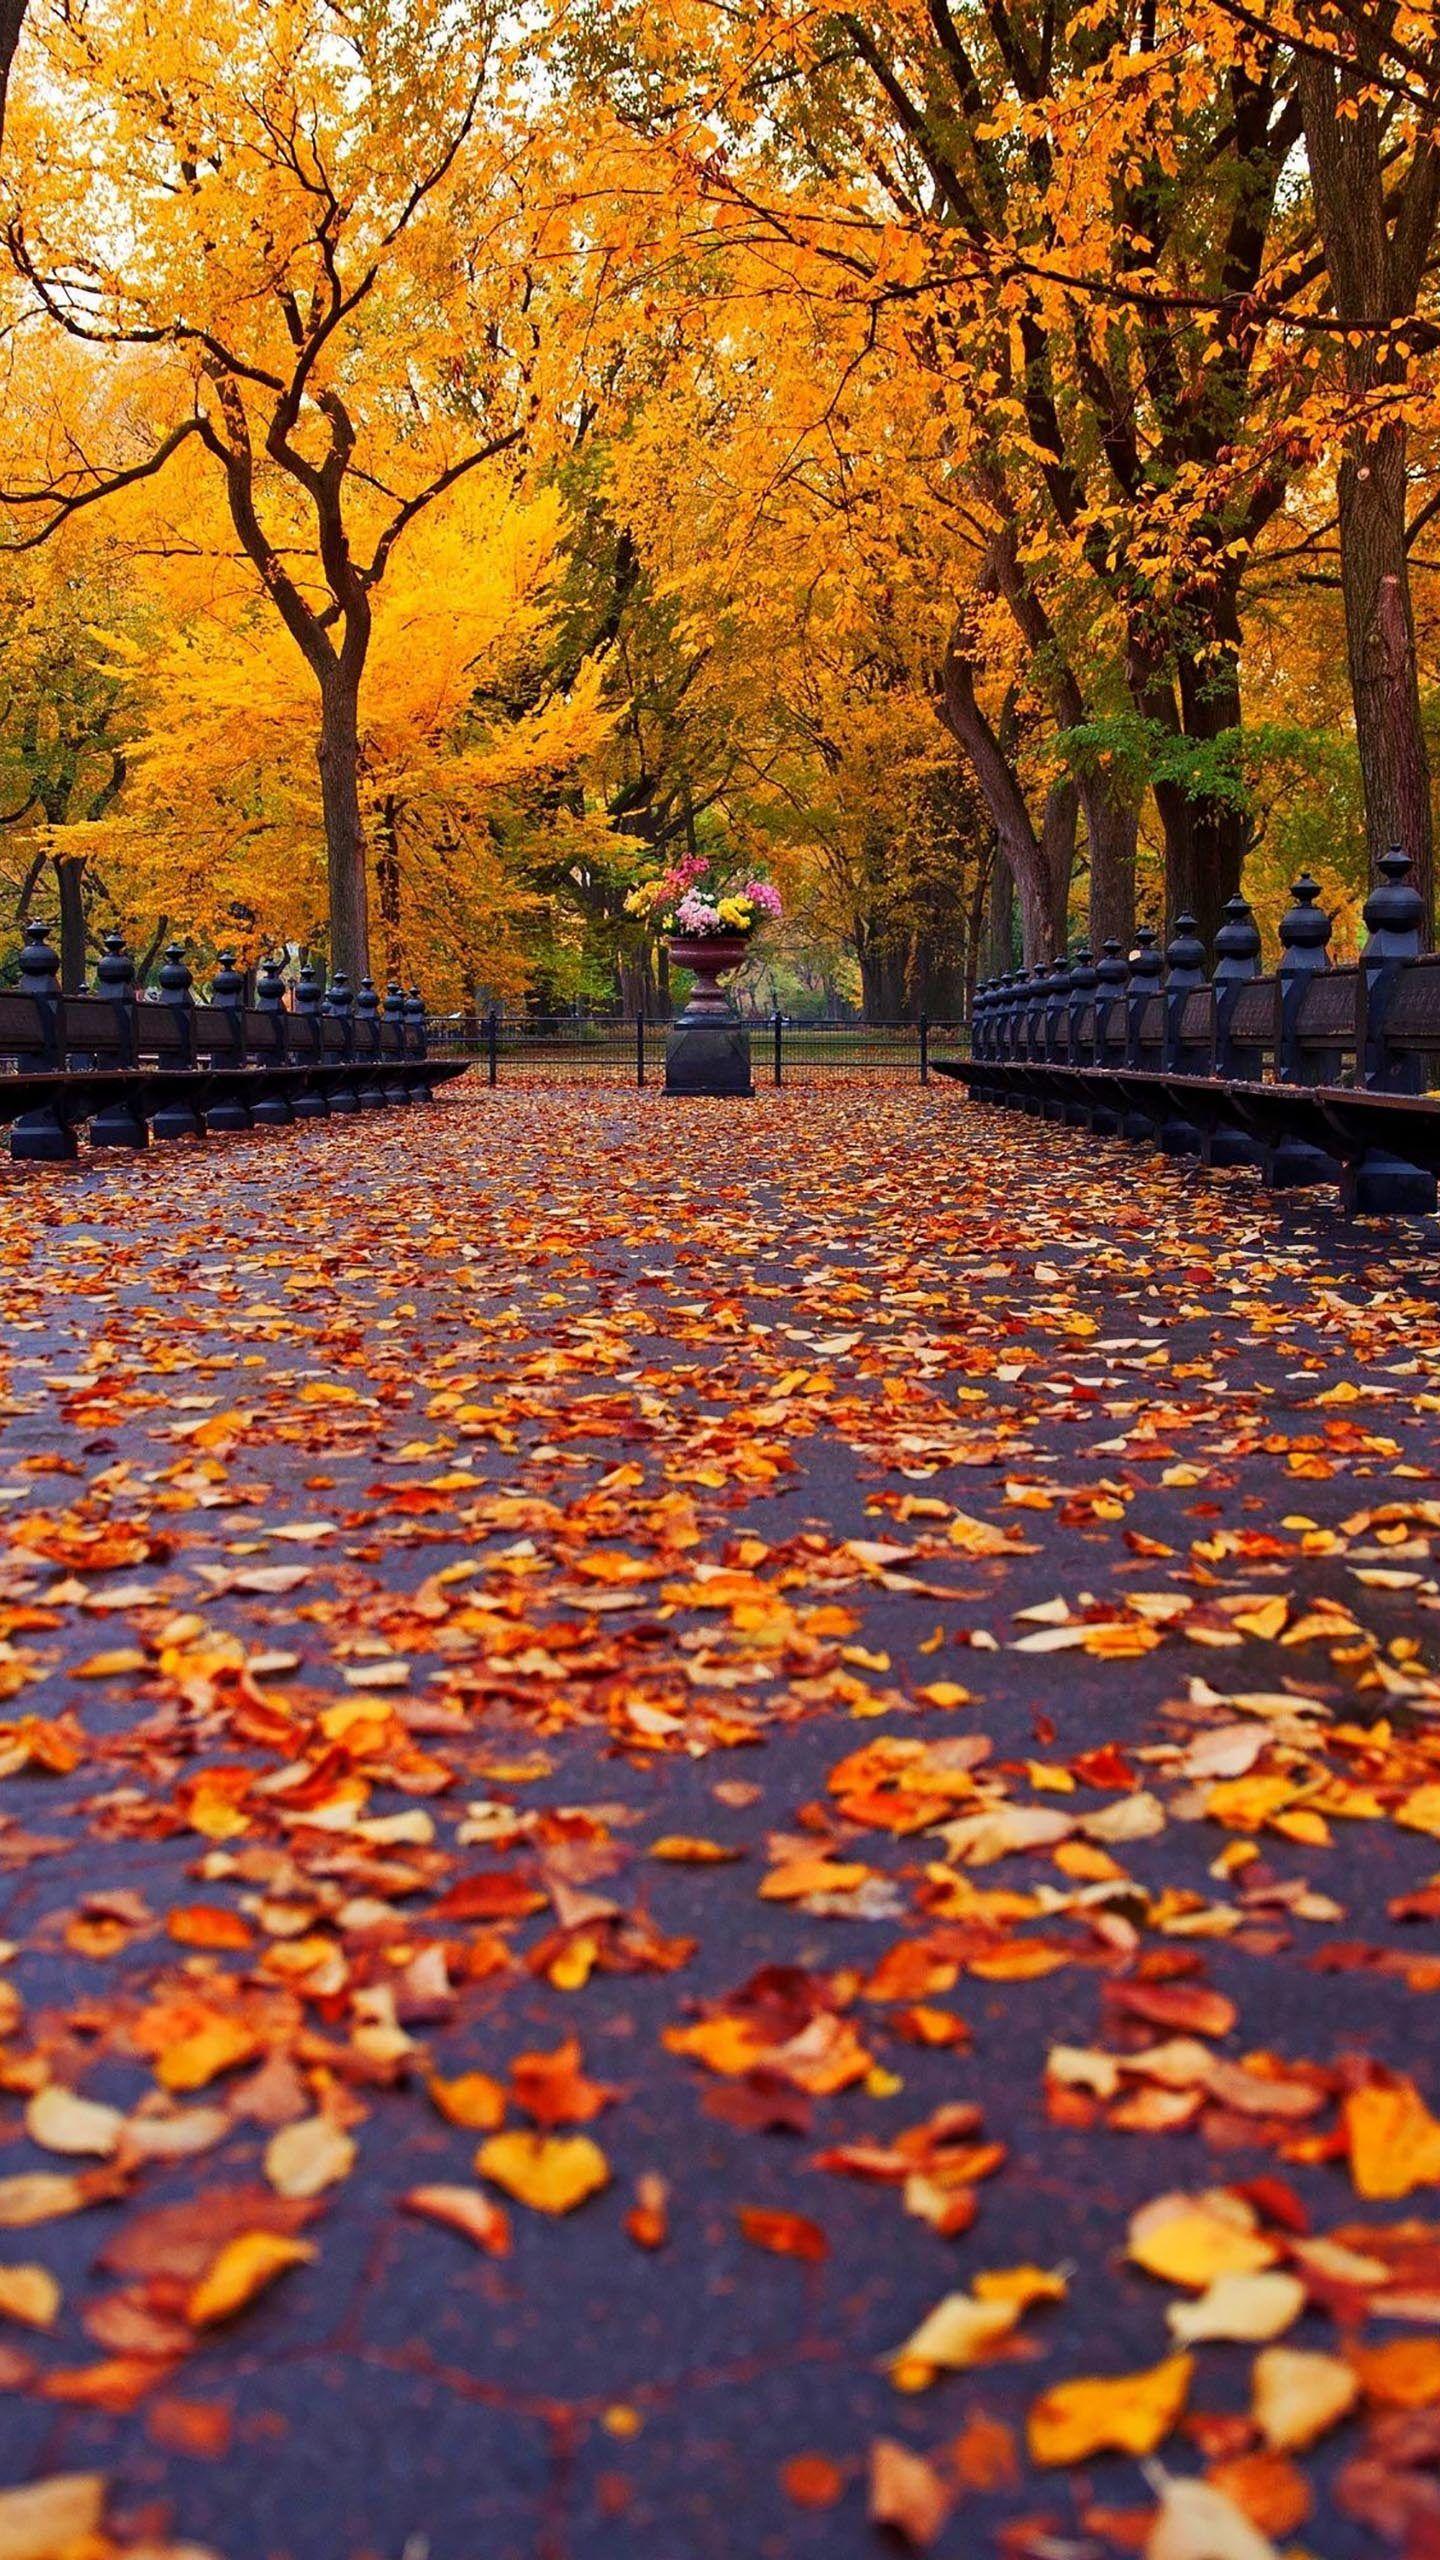 Autumn Mobile Wallpapers - Top Free Autumn Mobile Backgrounds ...